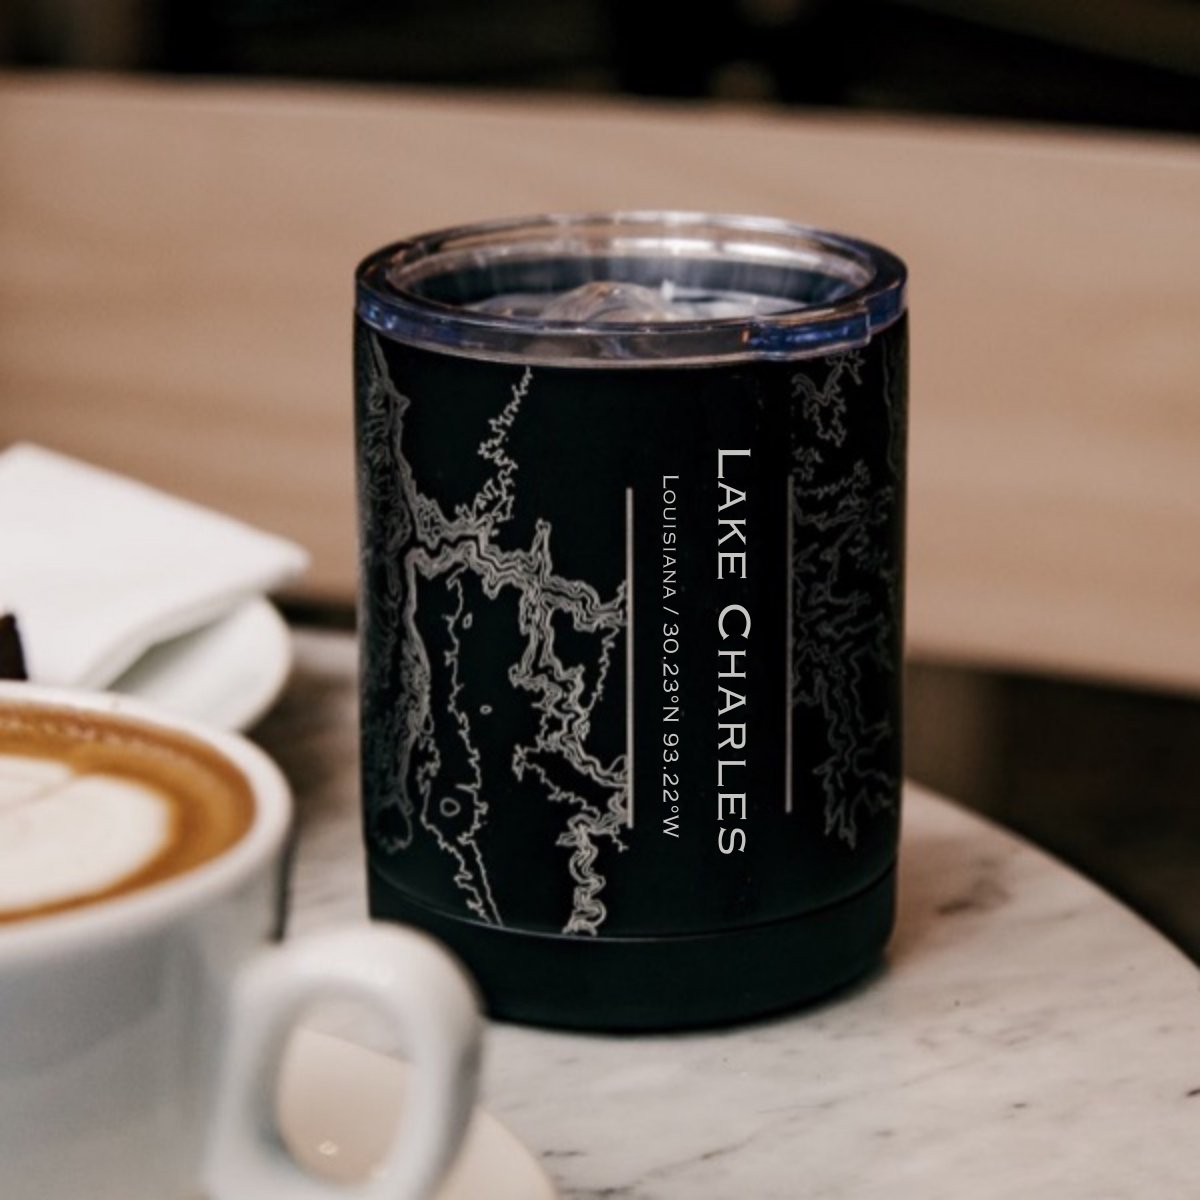 Lake Charles - Louisiana Map Insulated Cup in Matte Black | Cyan Castor